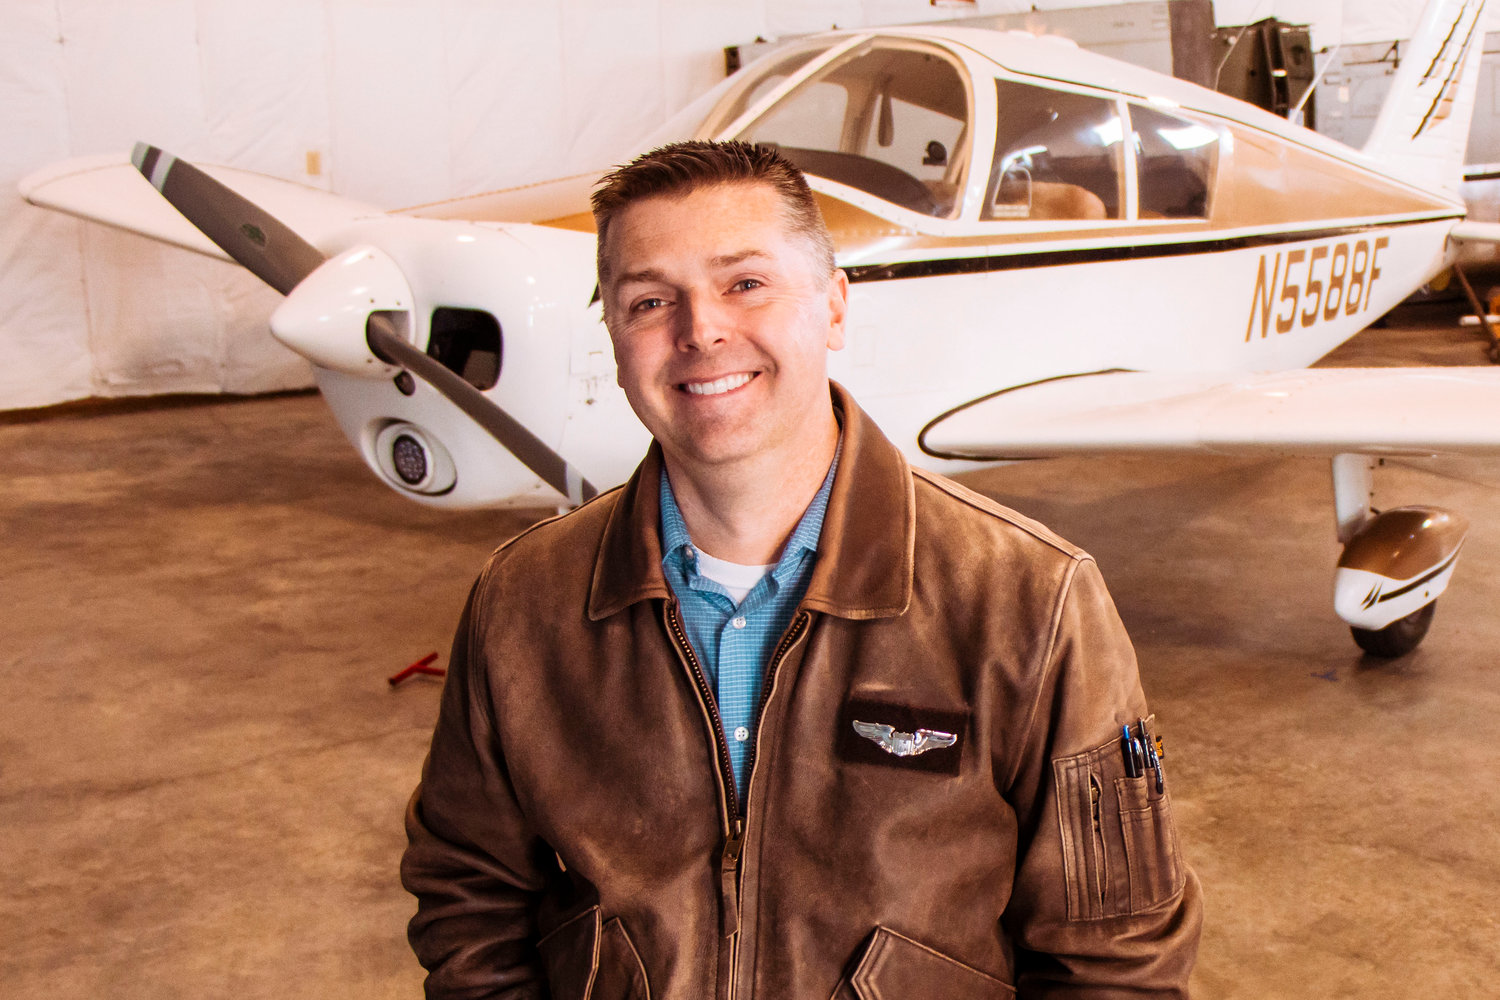 Airport Operations Coordinator Brandon Rakes smiles and poses for a photo in front of his aircraft in a hangar at the Chehalis-Centralia Airport on Wednesday.